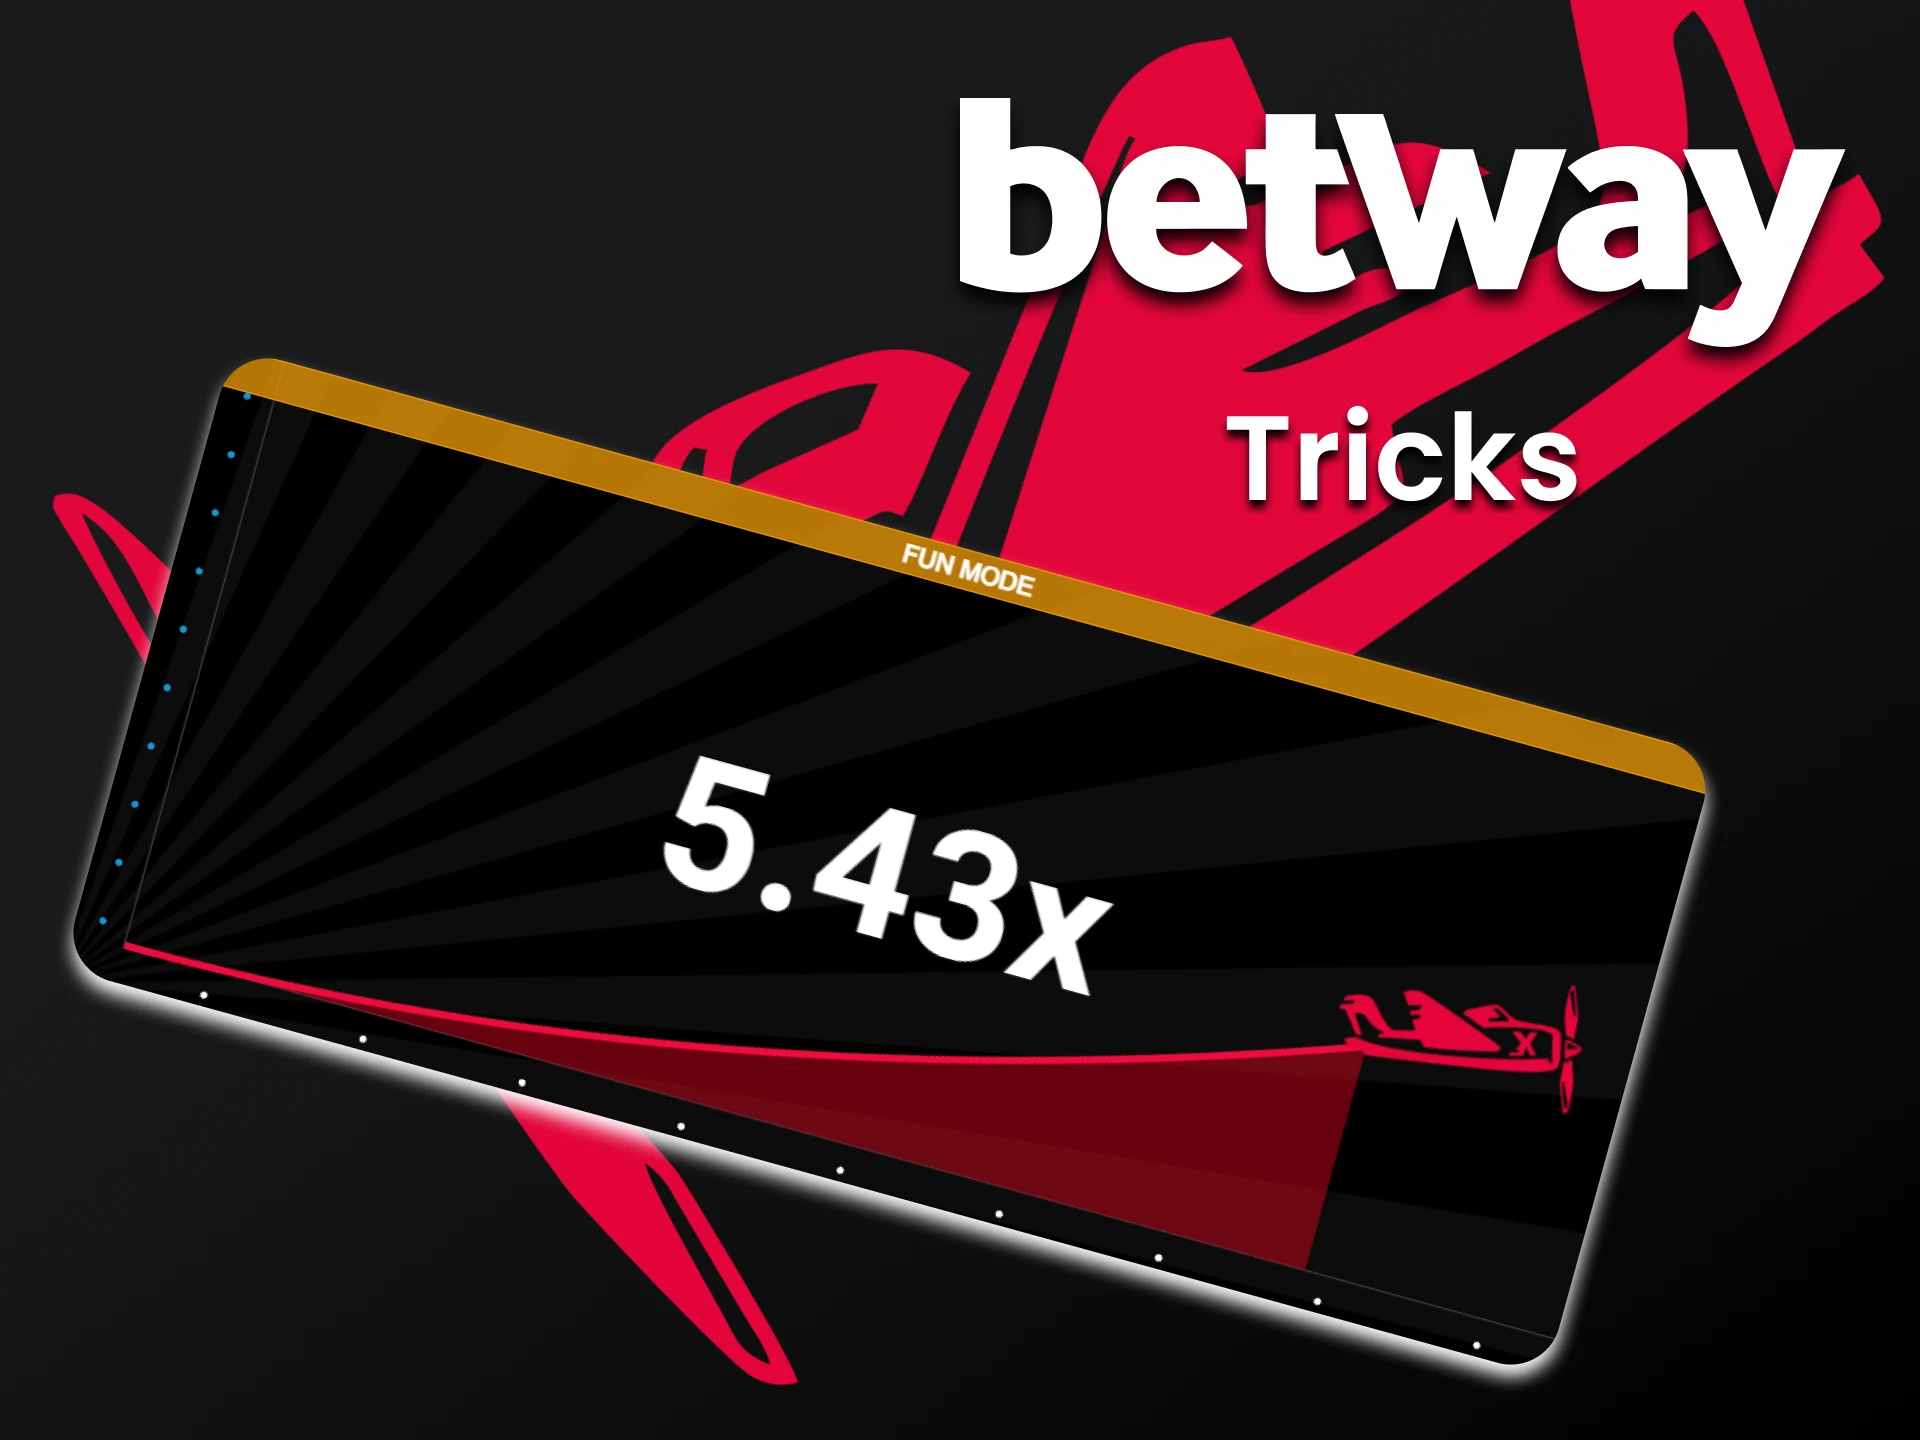 Win in Betway's Avaitor game using special skills.